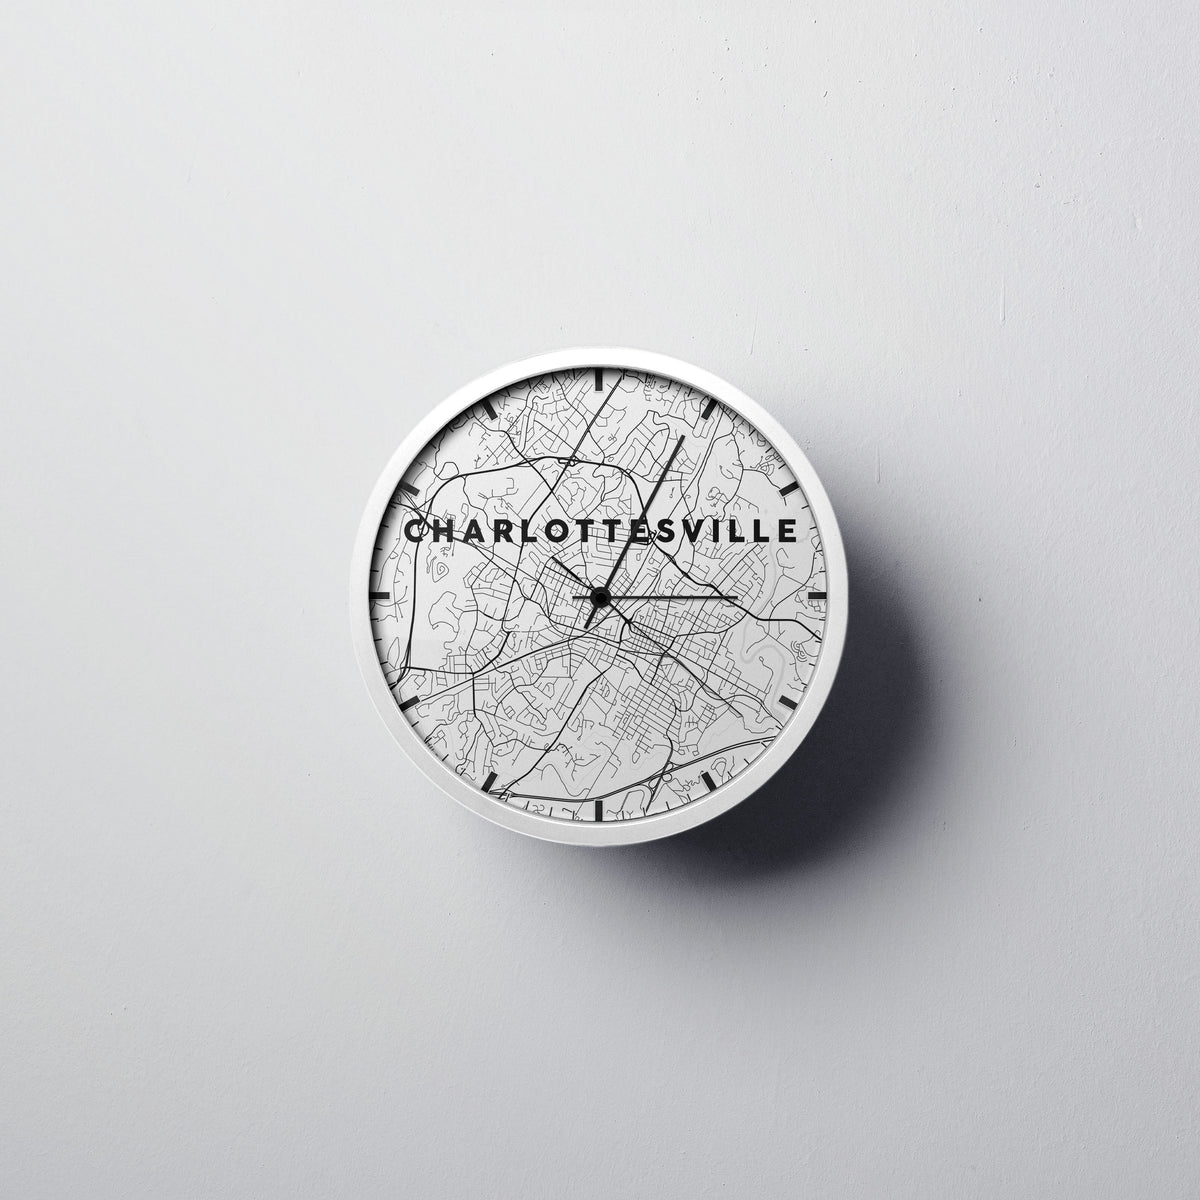 Charlottesville Wall Clock - Point Two Design